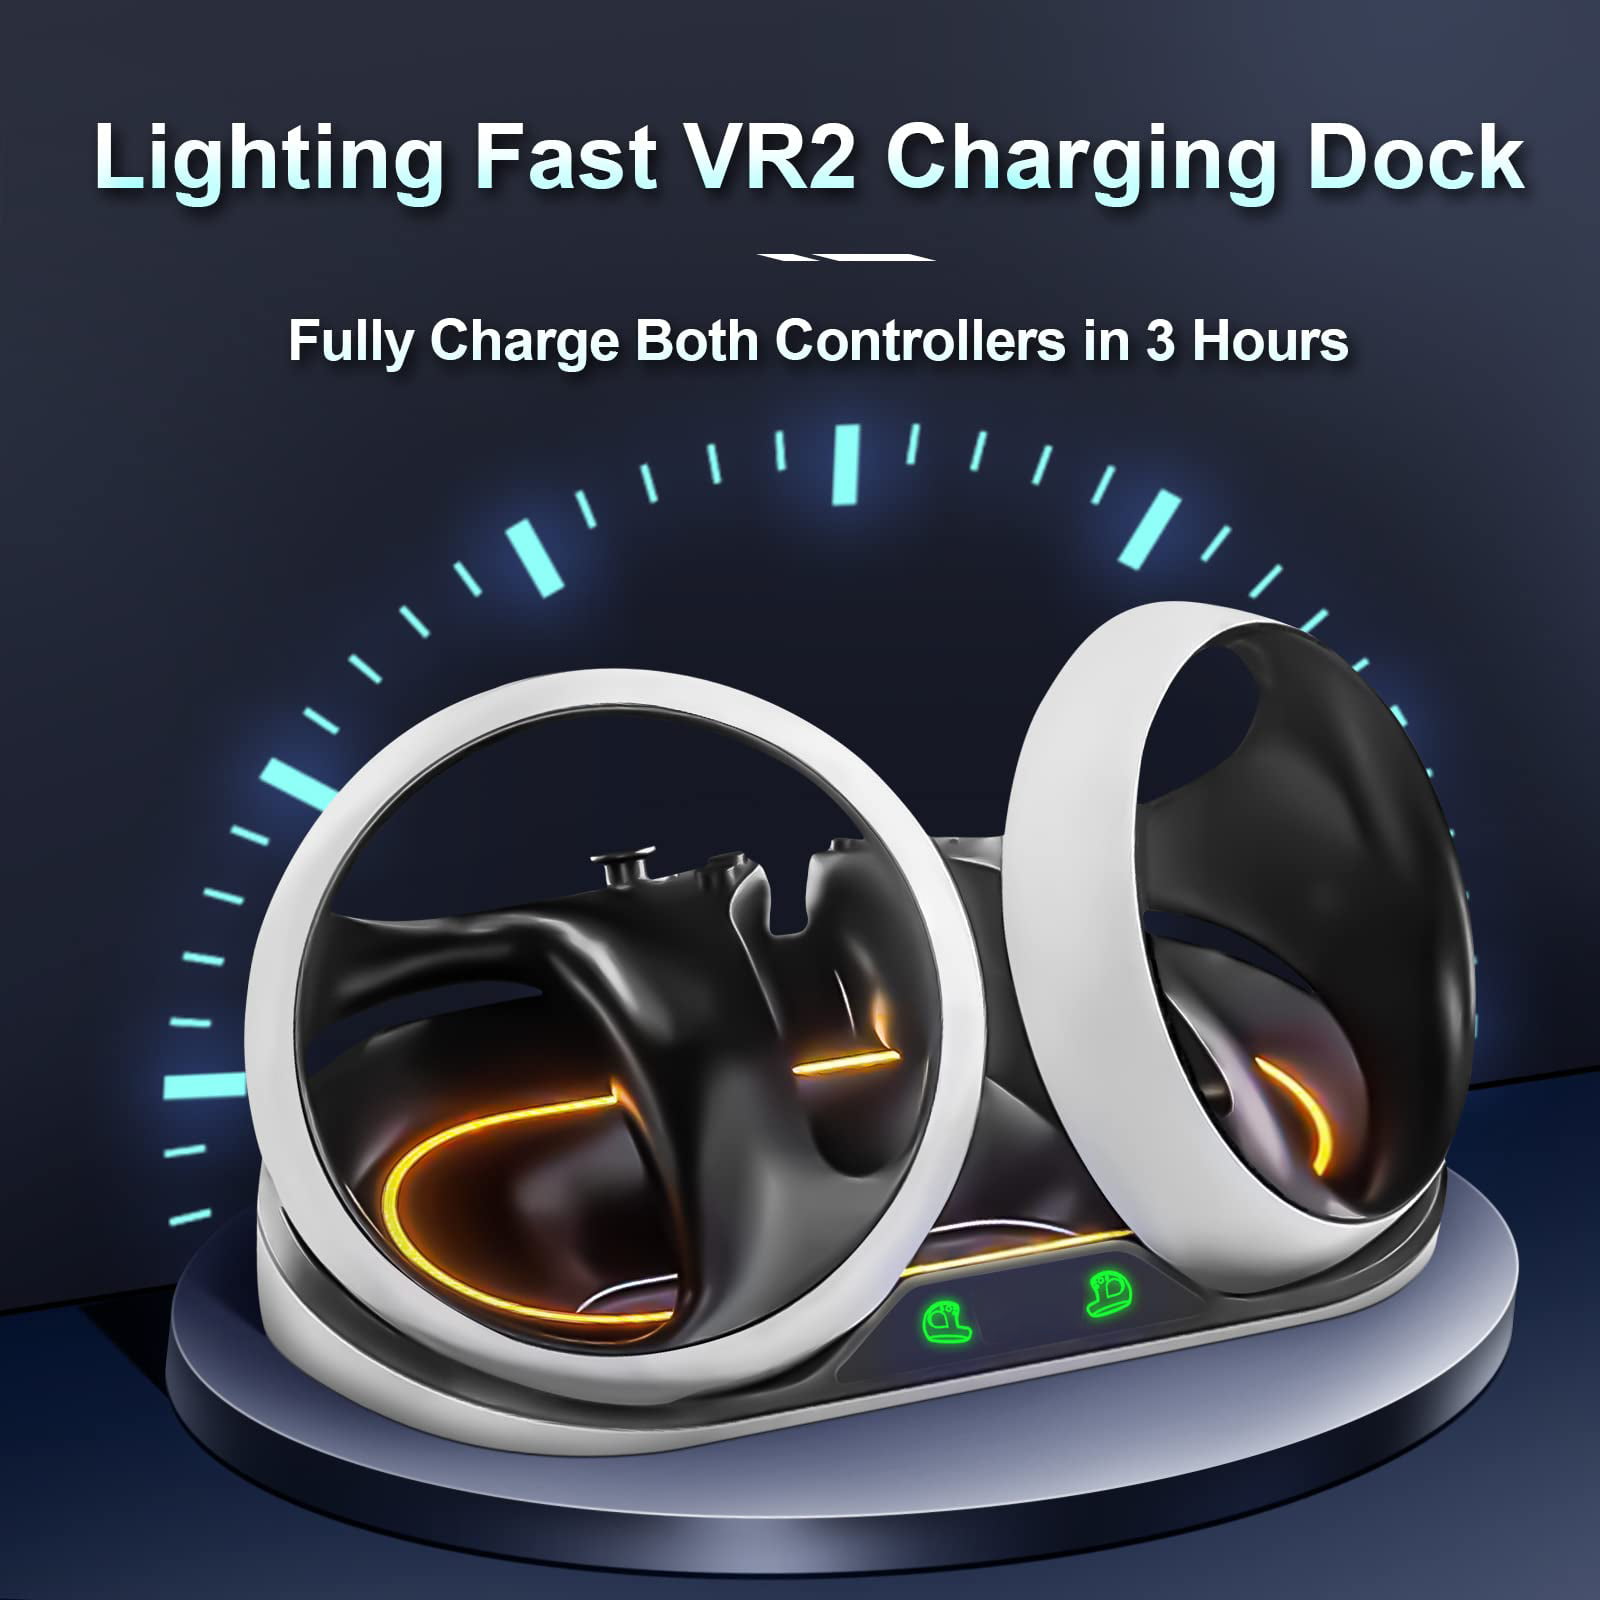 Hastraith Charging Dock for PS5 VR2 Controller, Fast Charger Station with 2  Rechargeable Port, Magnetic Charging Base with LED Indicator for PS VR2